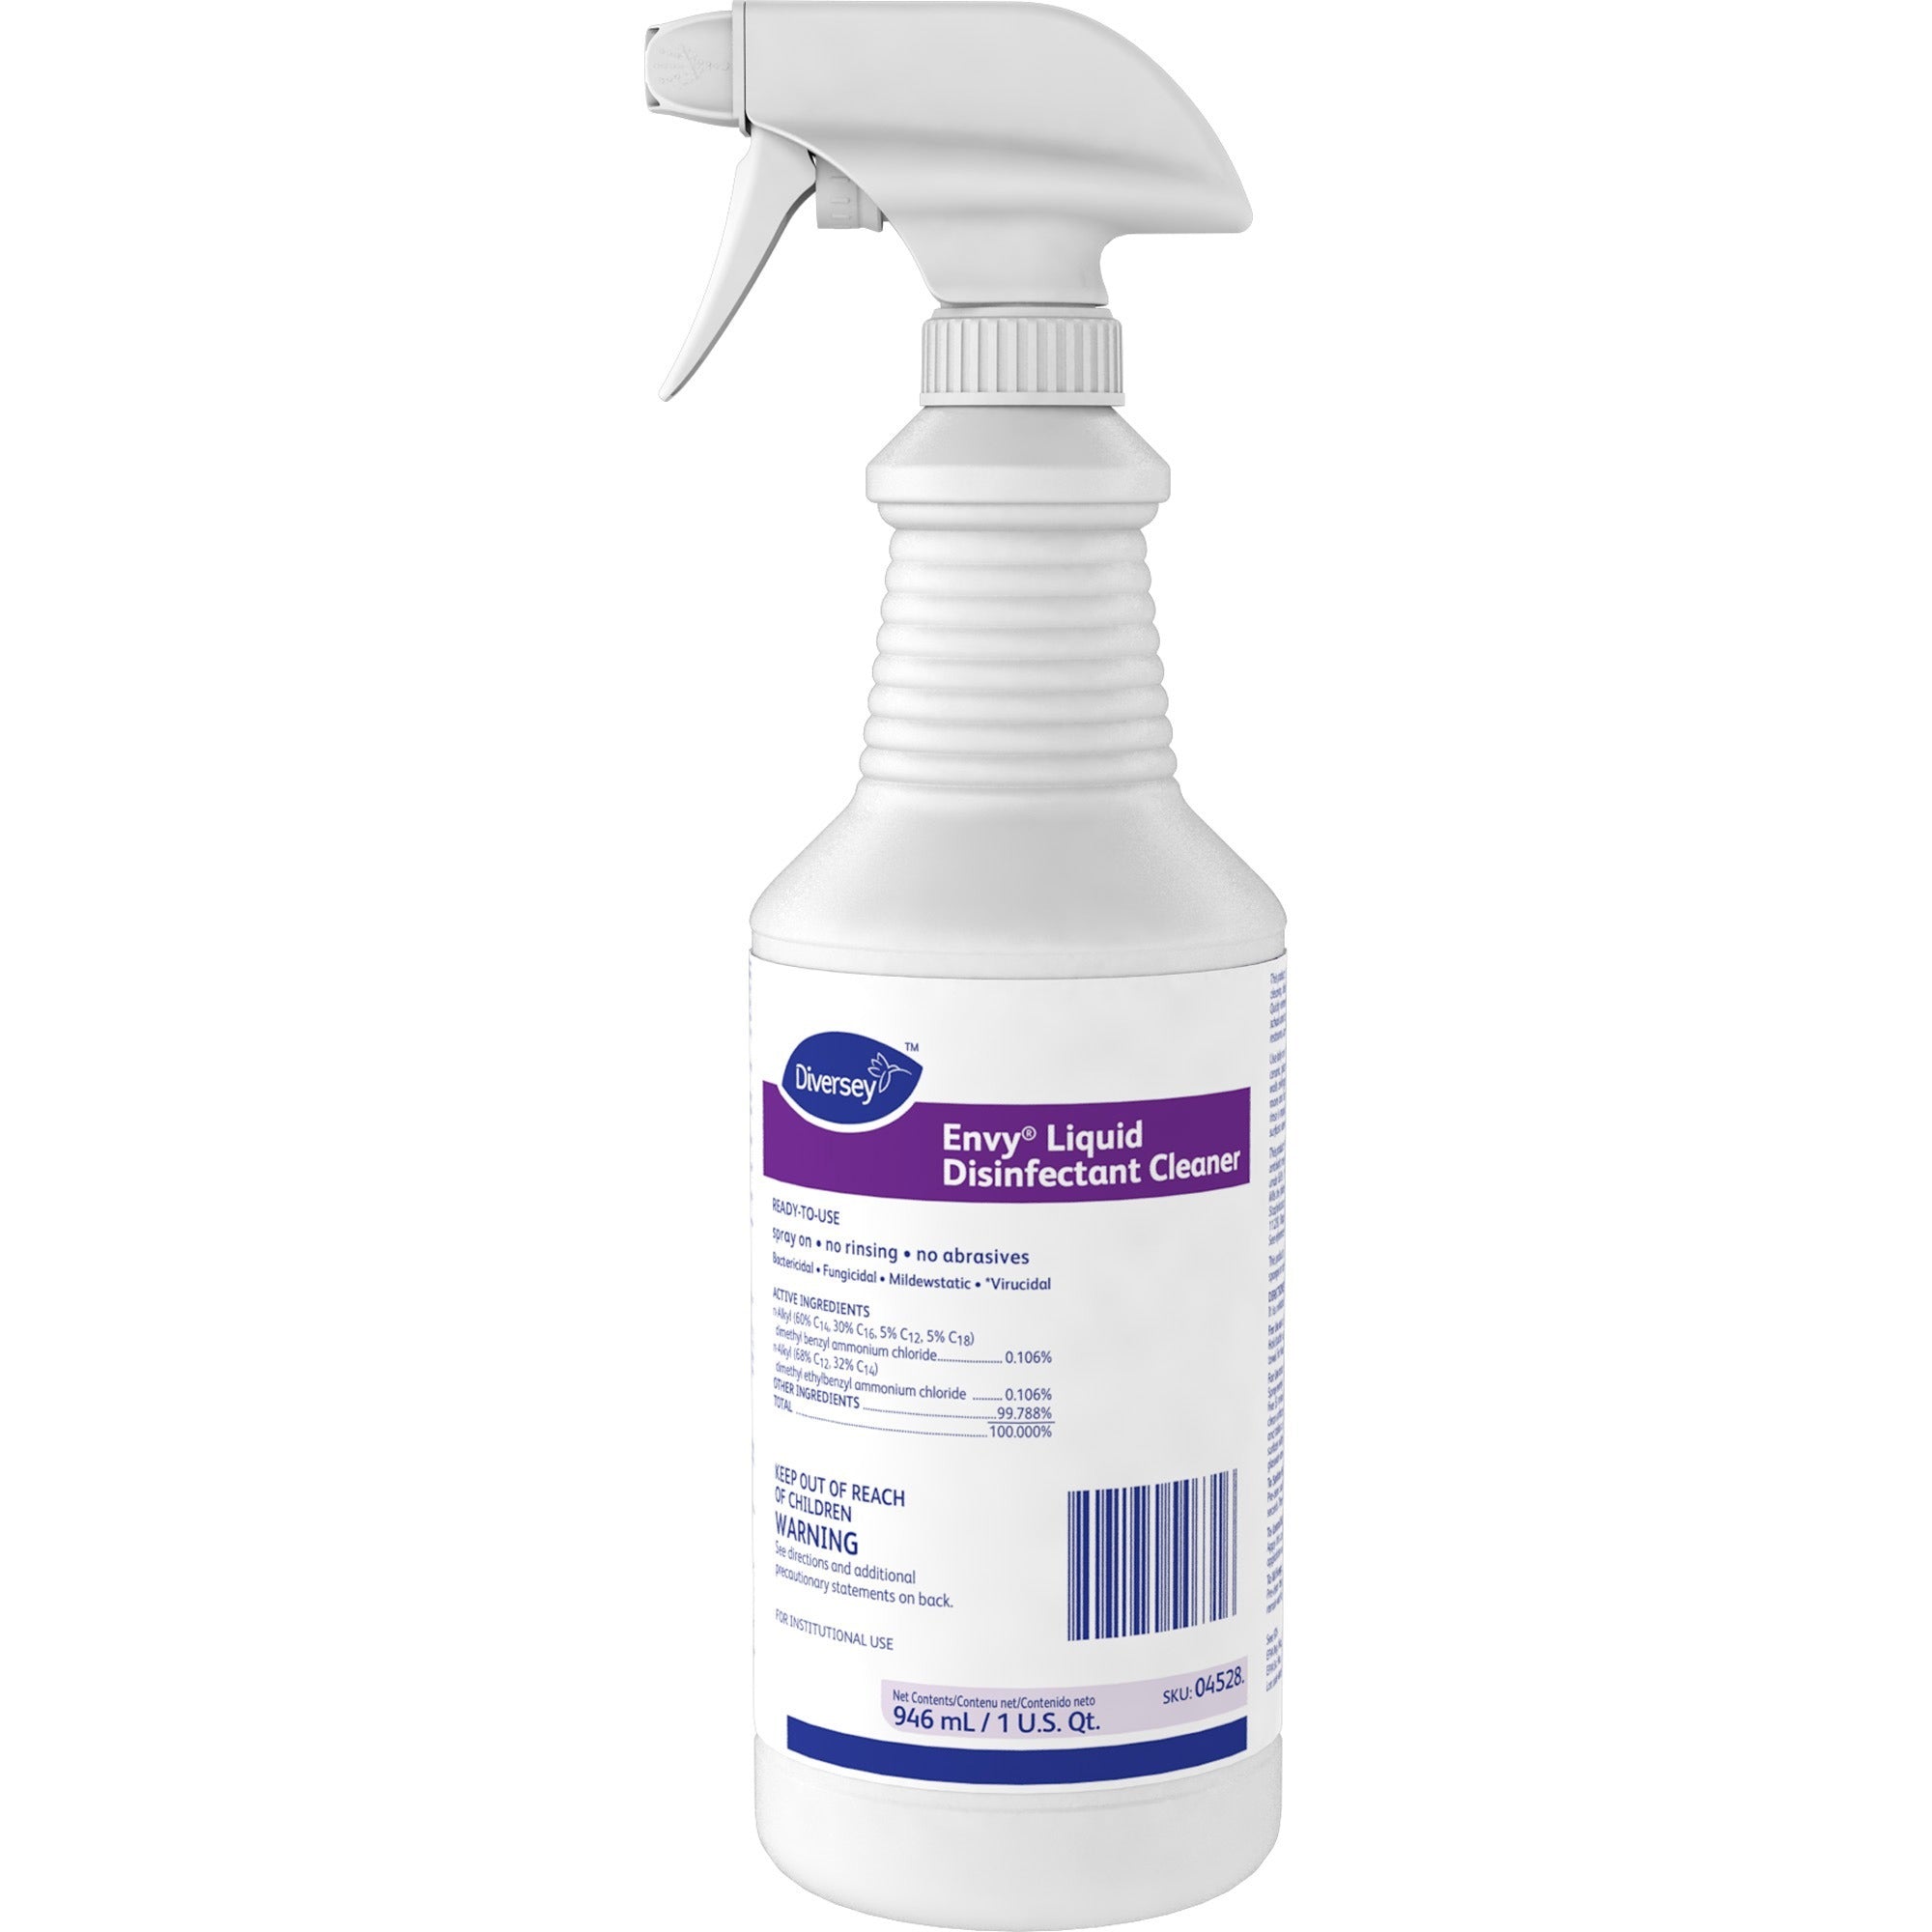 diversey-envy-liquid-disinfectant-cleaner-ready-to-use-32-fl-oz-1-quart-lavender-ammonia-scent-1-each-color-free-disinfectant-virucidal-bactericide-fungicide-mildewstatic-rinse-free-non-abrasive-deodorize-clear_dvo04528 - 2